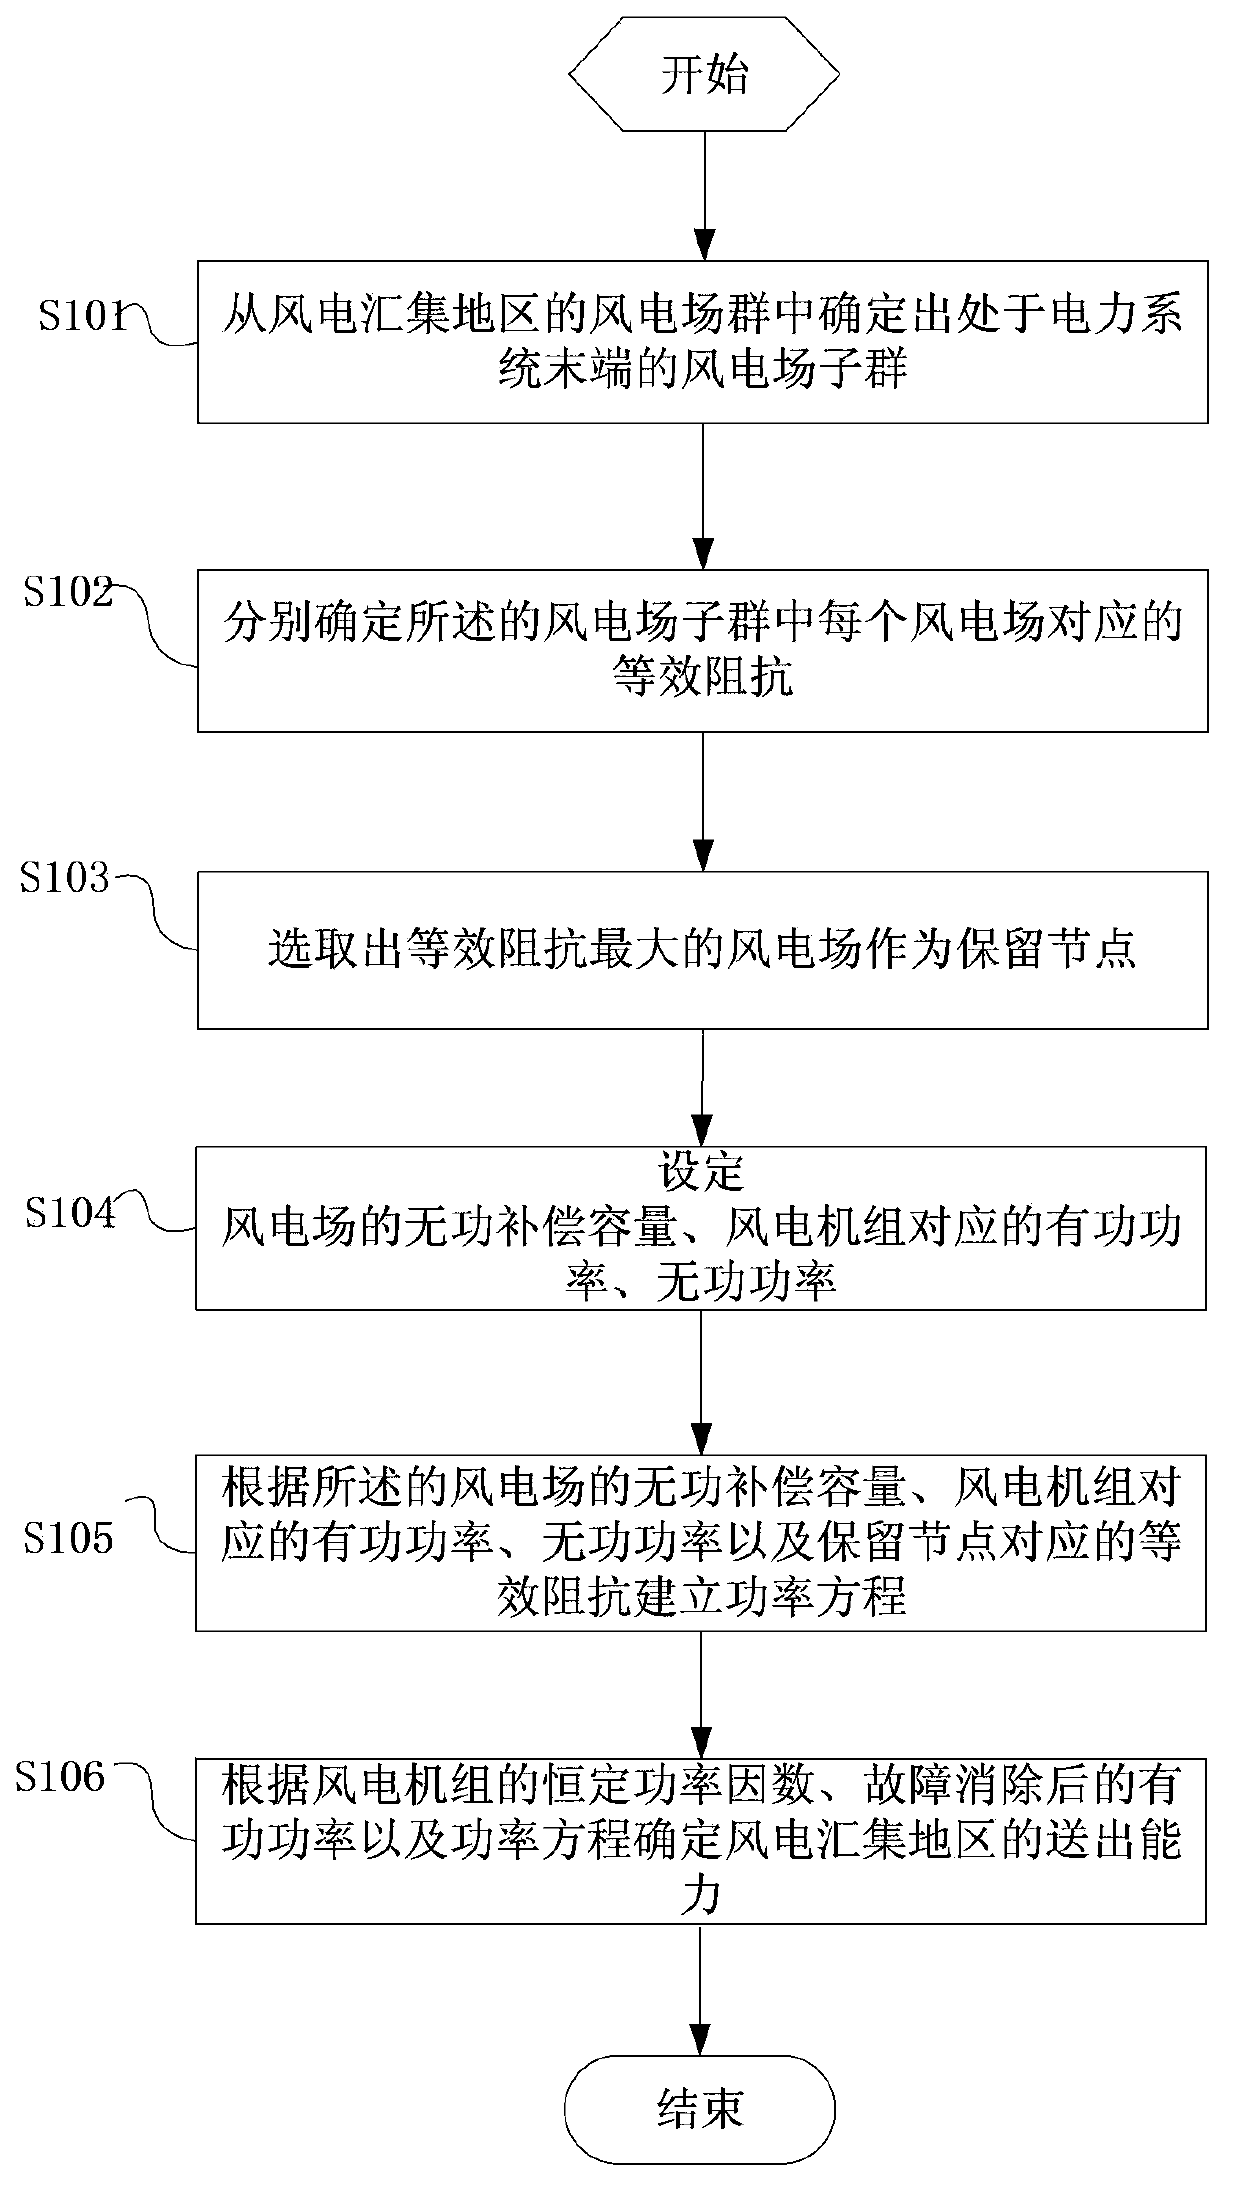 Large-scale wind power convergence area sending-out capacity determination method and large-scale wind power convergence area sending-out capacity determination equipment